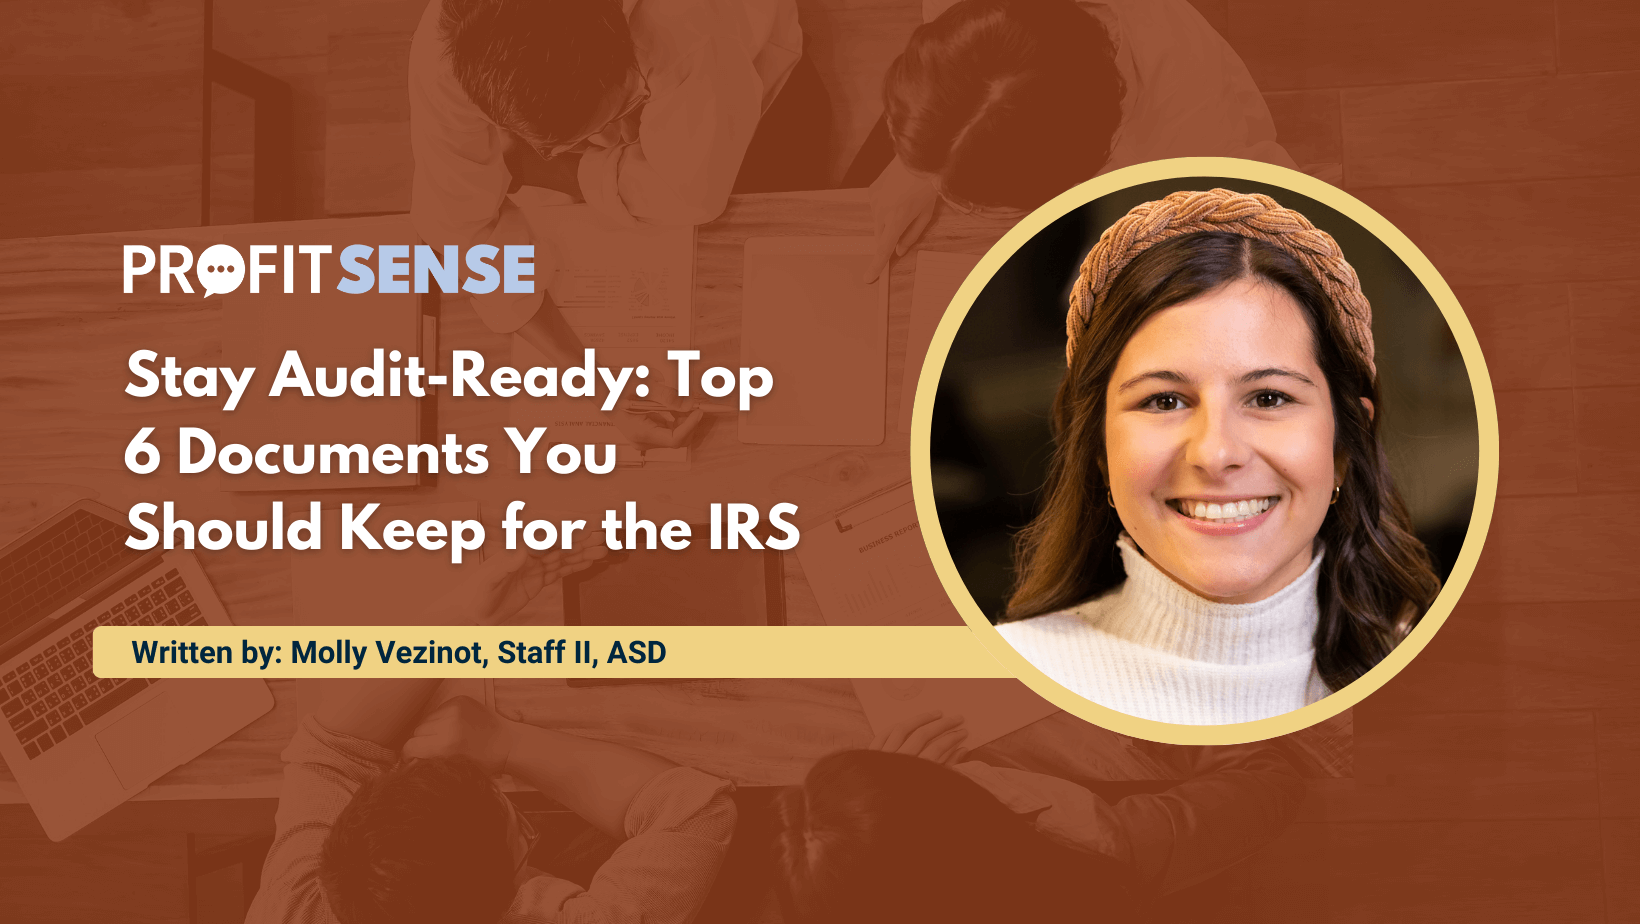 Stay Audit-Ready: Top 6 Documents You Should Keep for the IRS